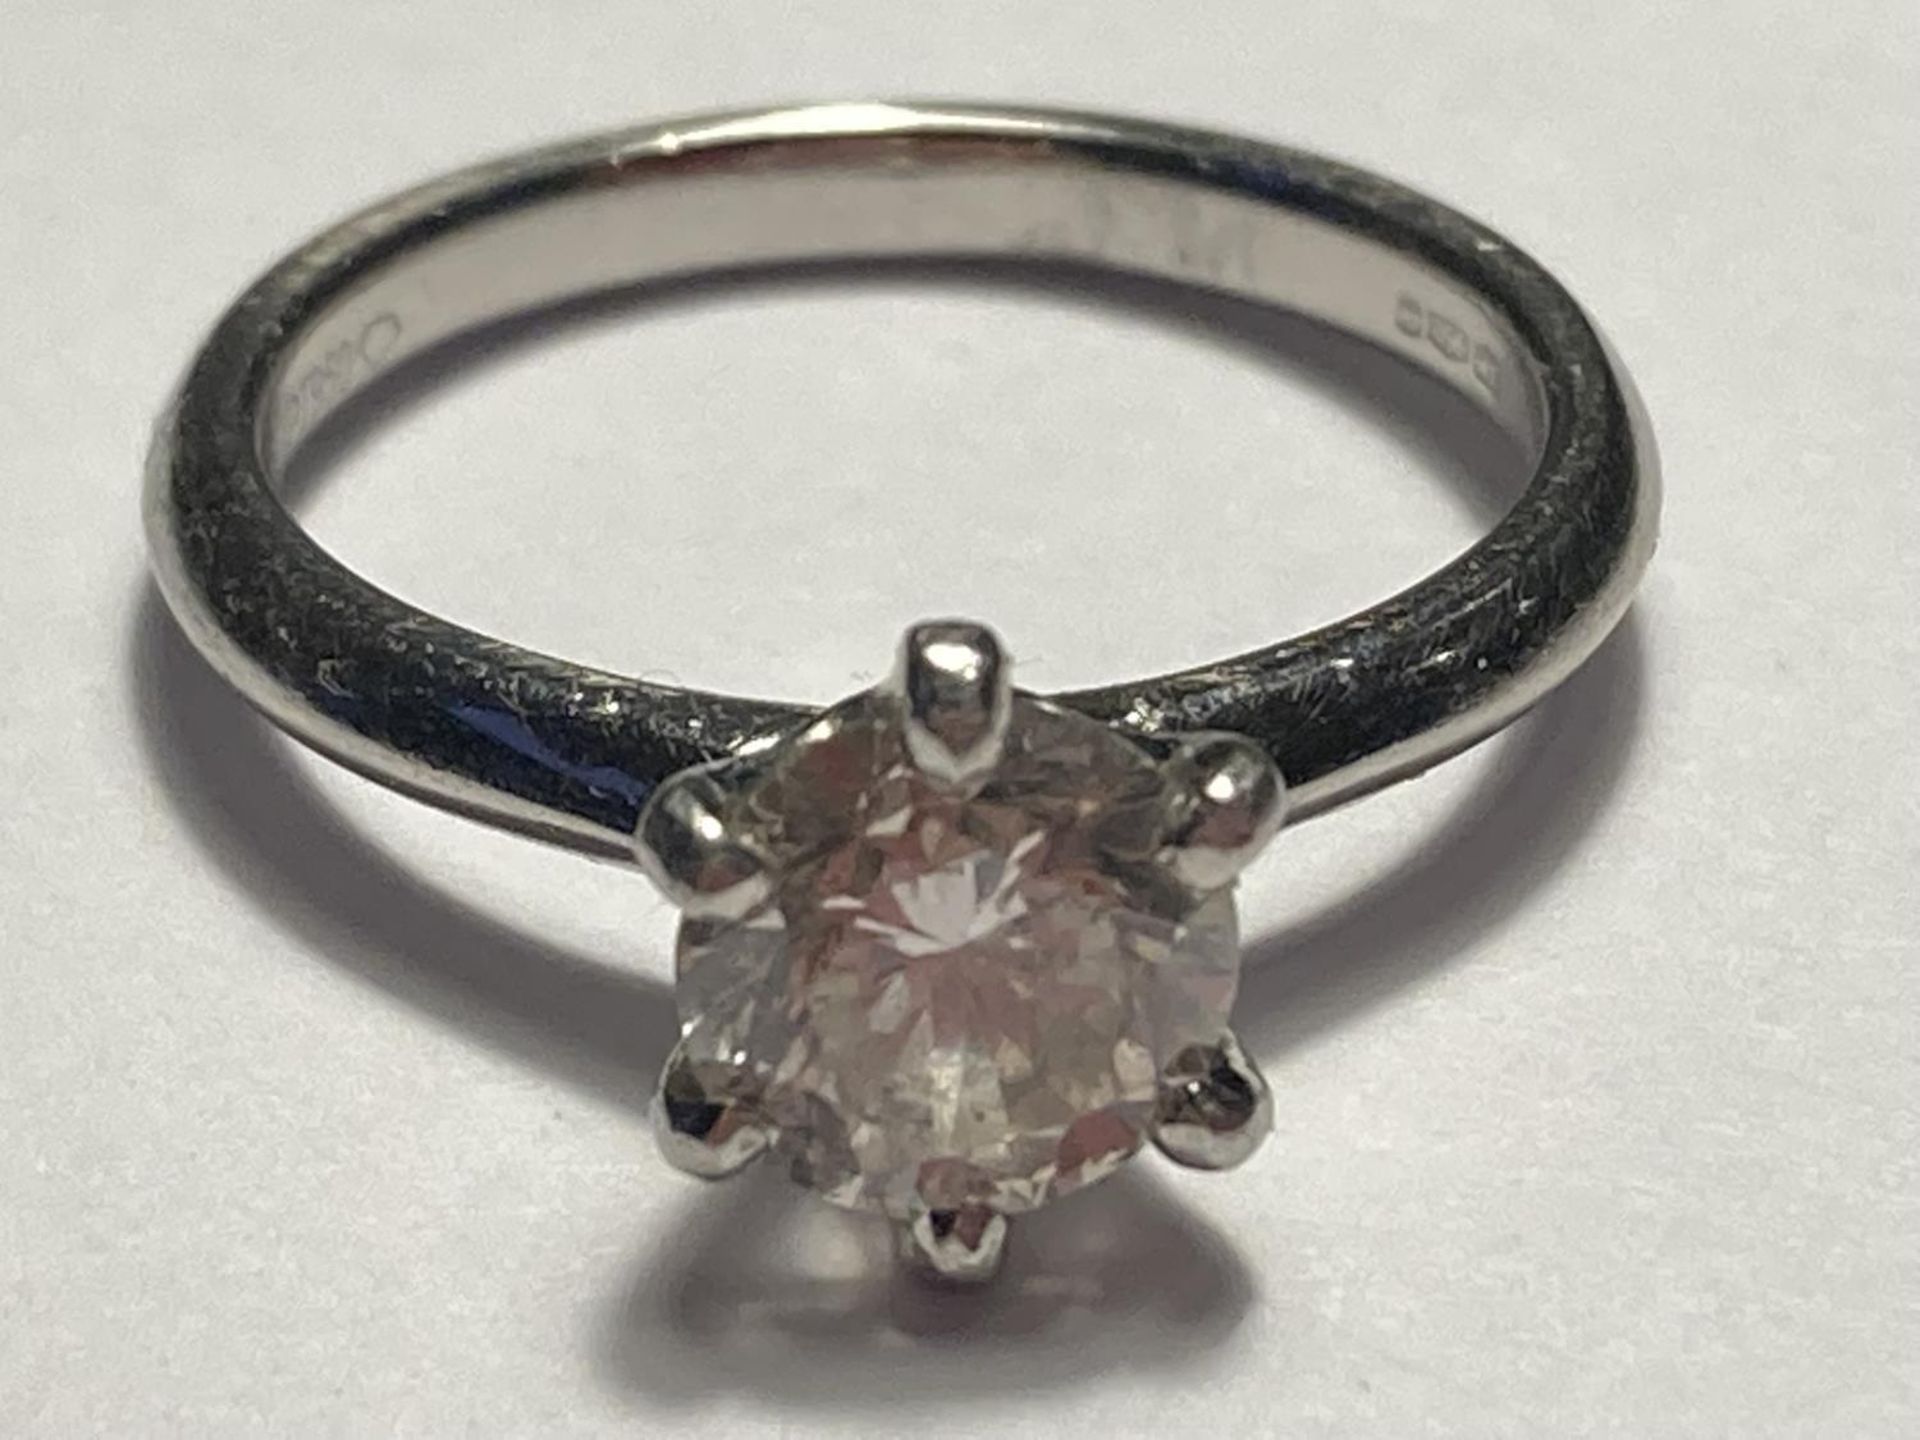 A PLATINUM (PT950) RING WITH A ONE CARAT SOLITAIRE DIAMOND SIZE M